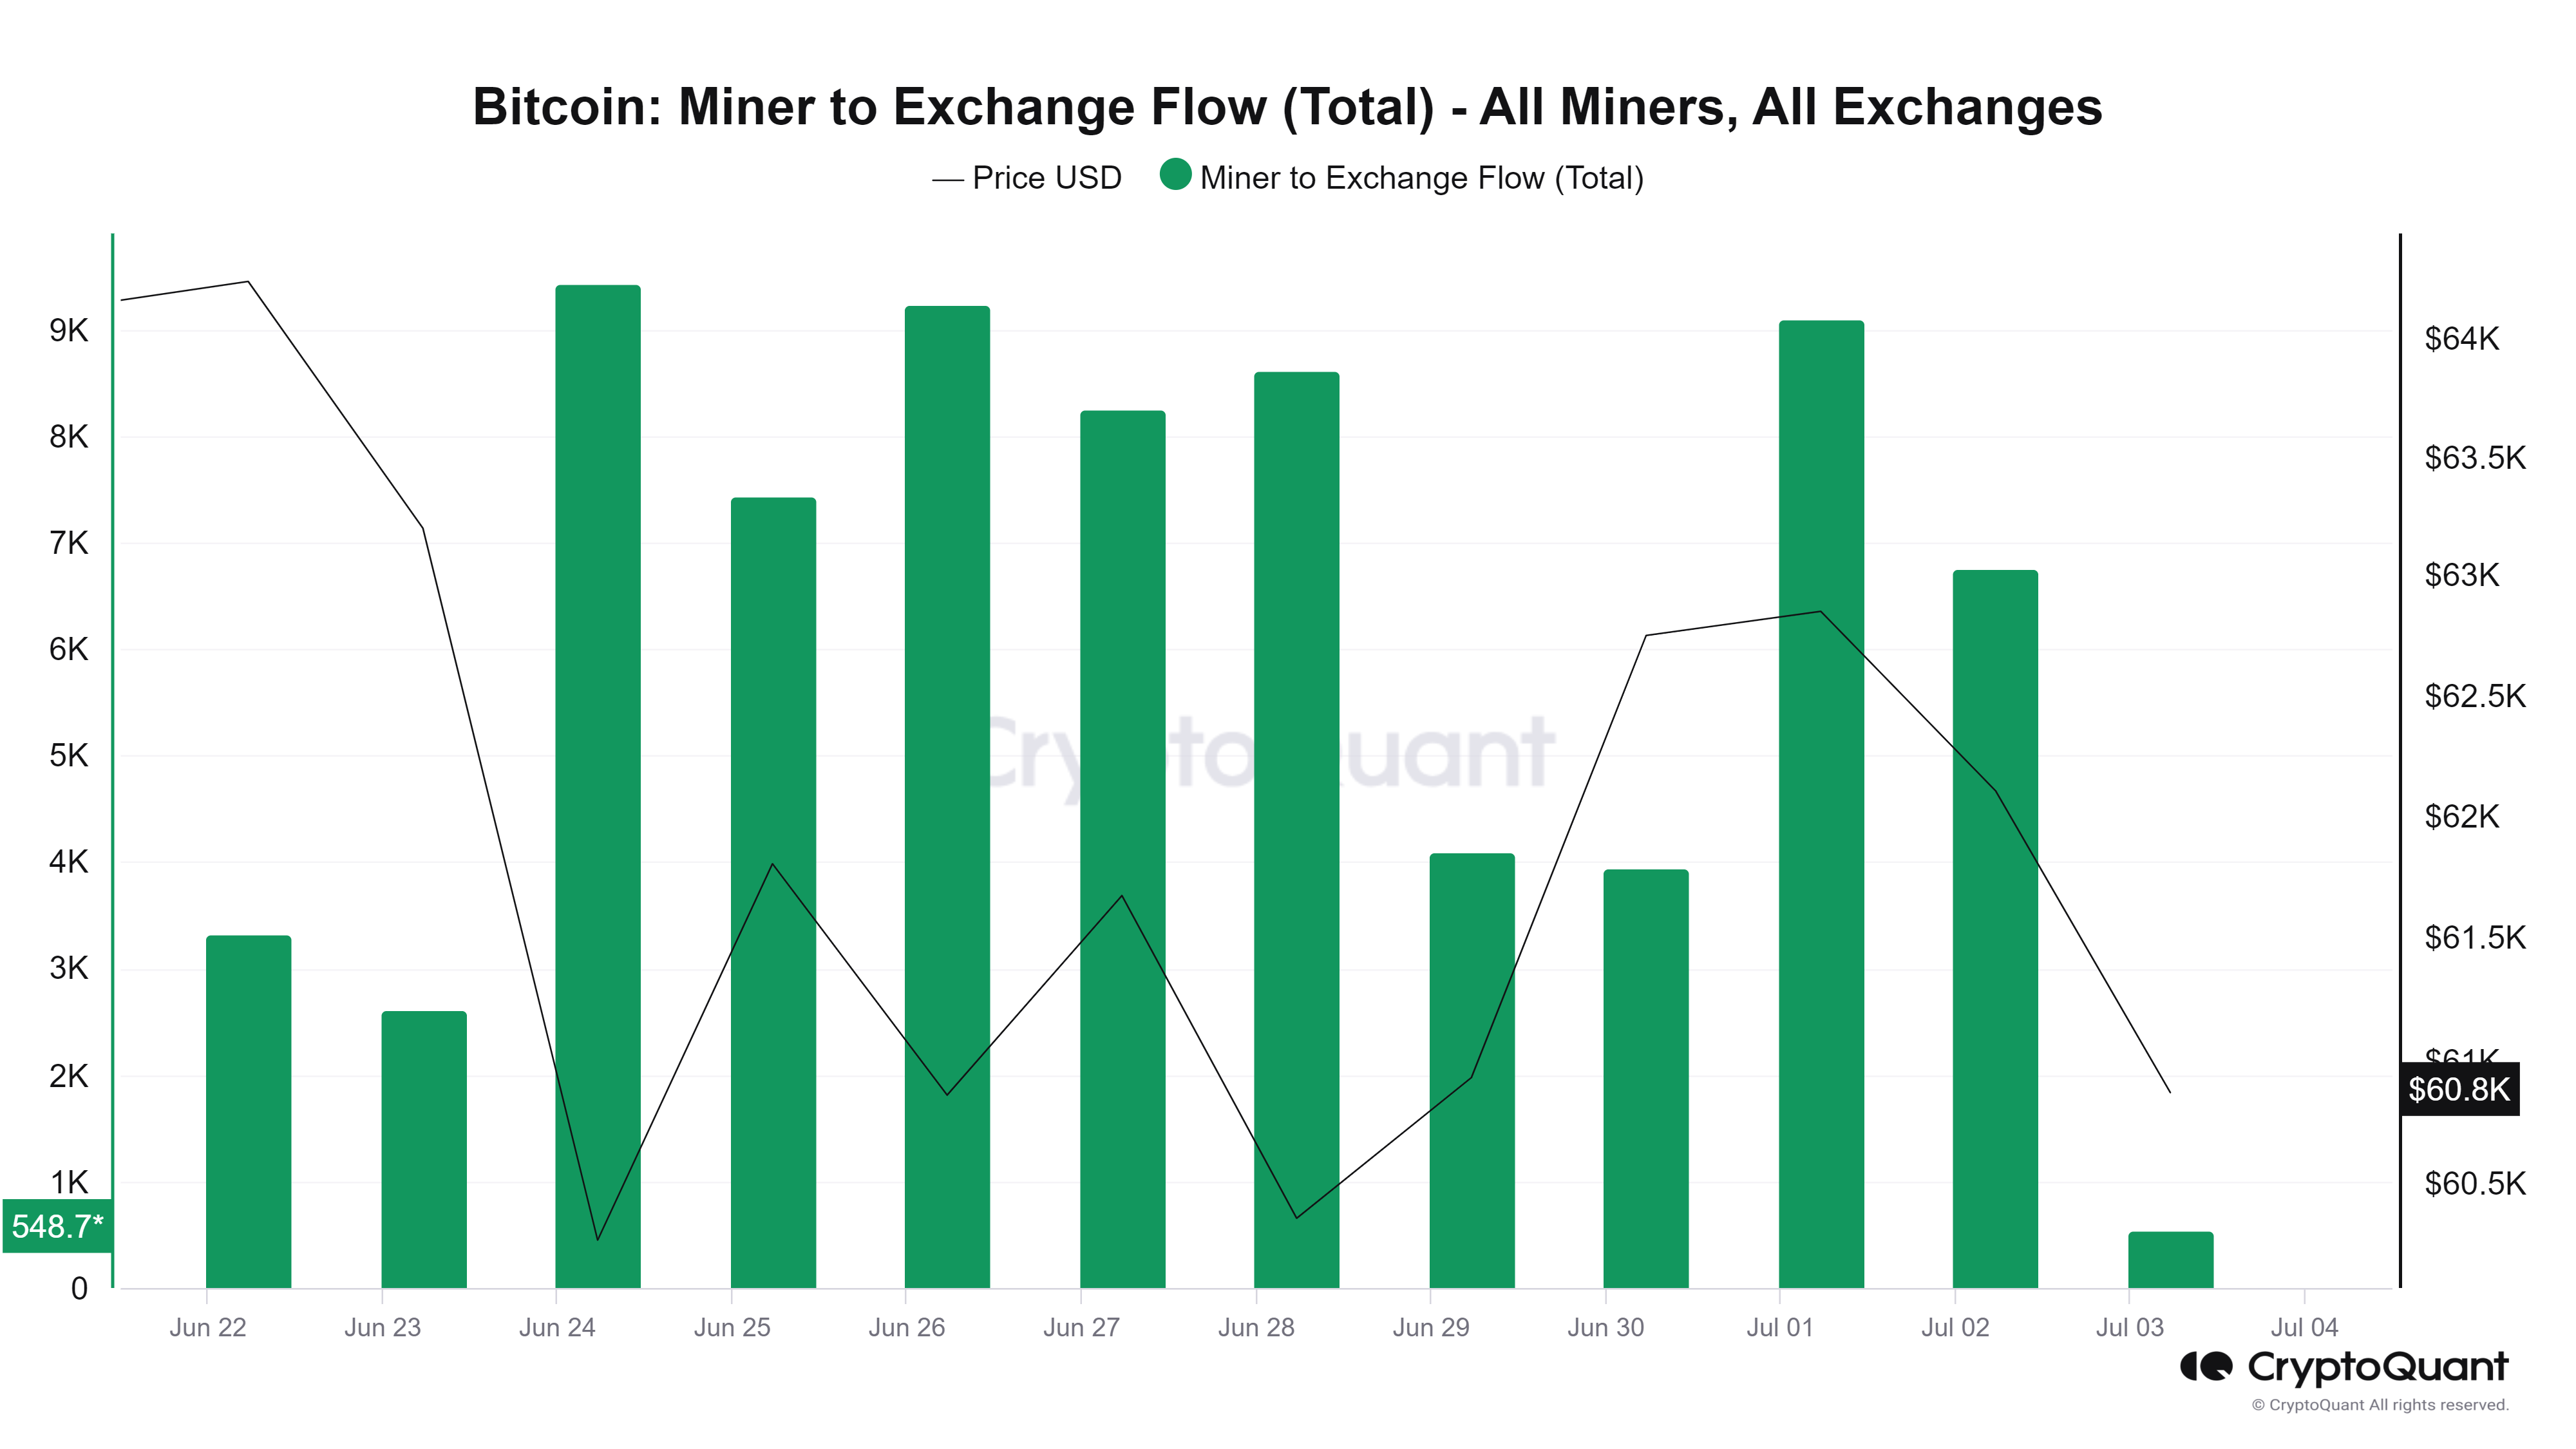 Bitcoin Miners to Exchange Flow (Total) chart